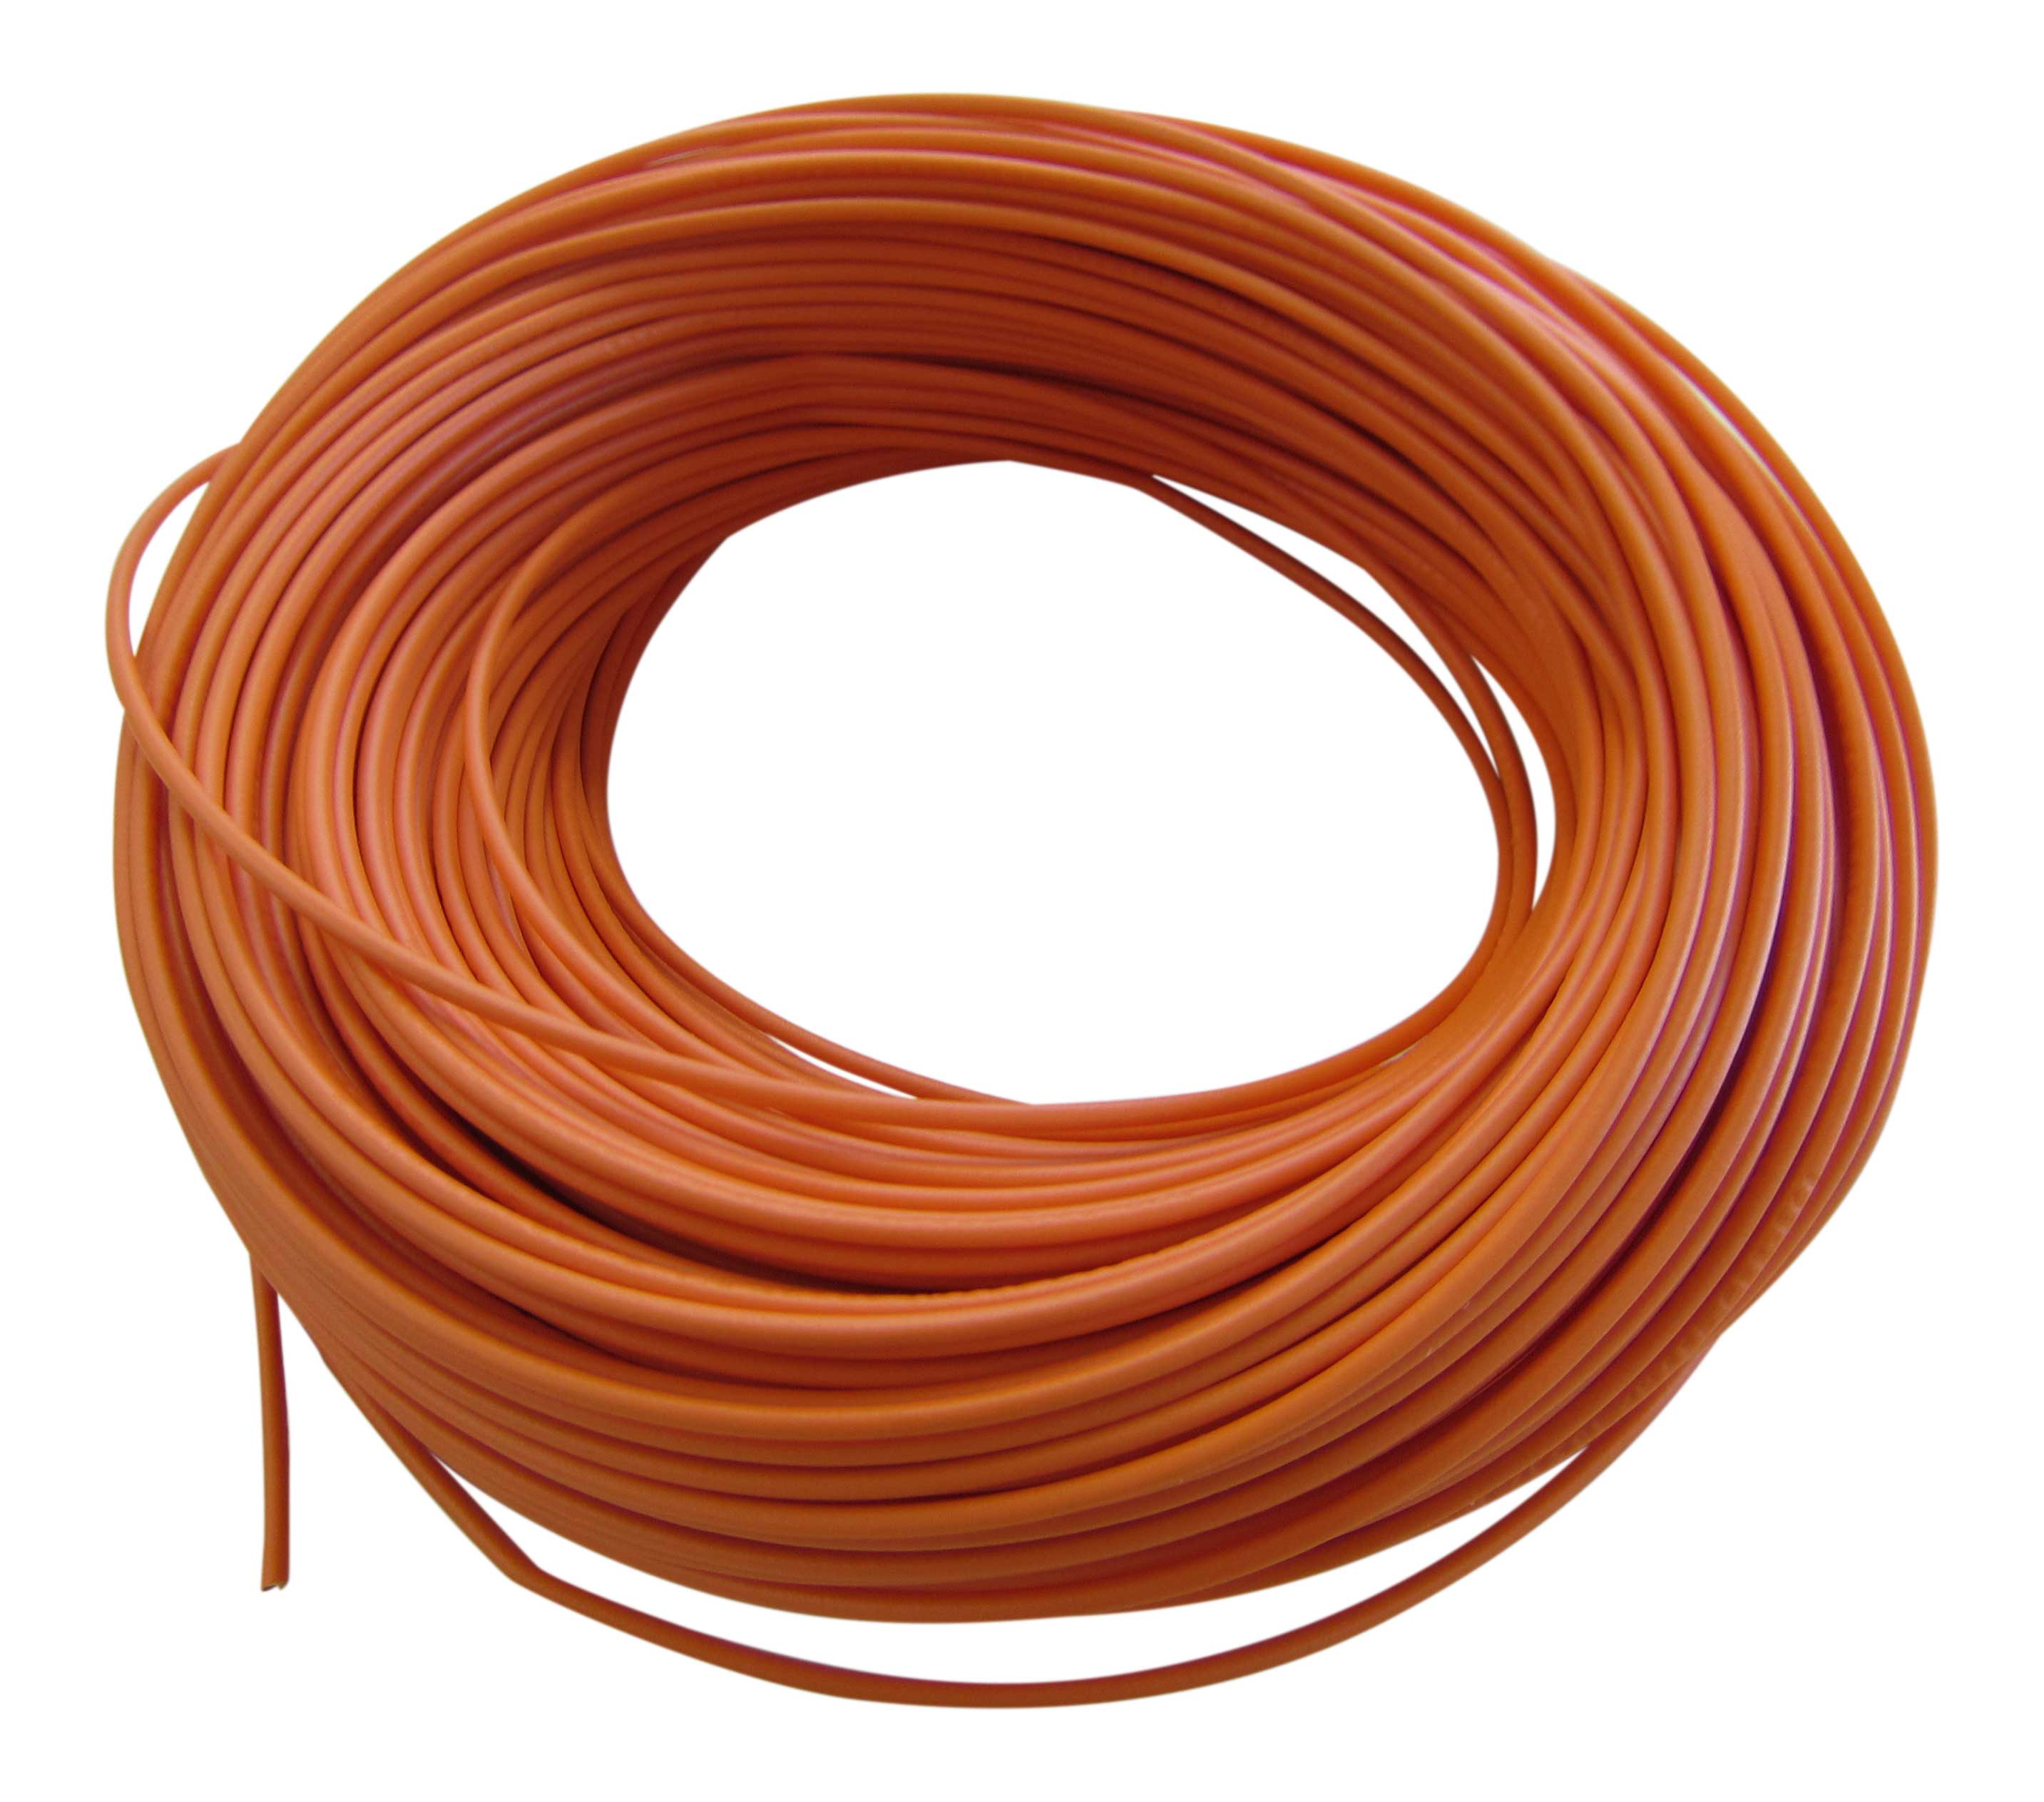 20m €0.29/m / 10m €0.38/m car truck cable strand cable 0.5mm FLRy FREE  CHOICE